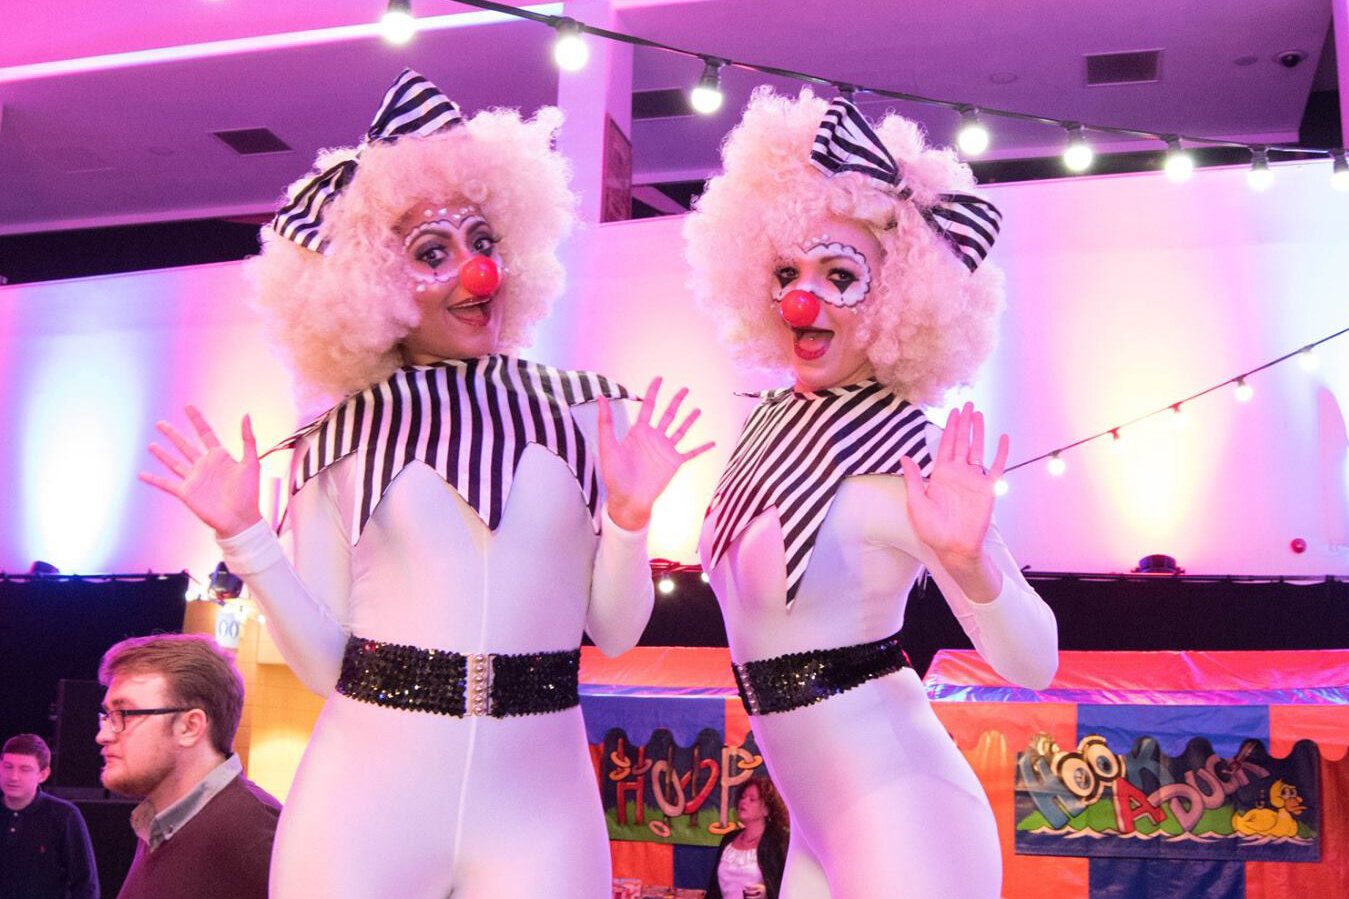 Clown performers at event